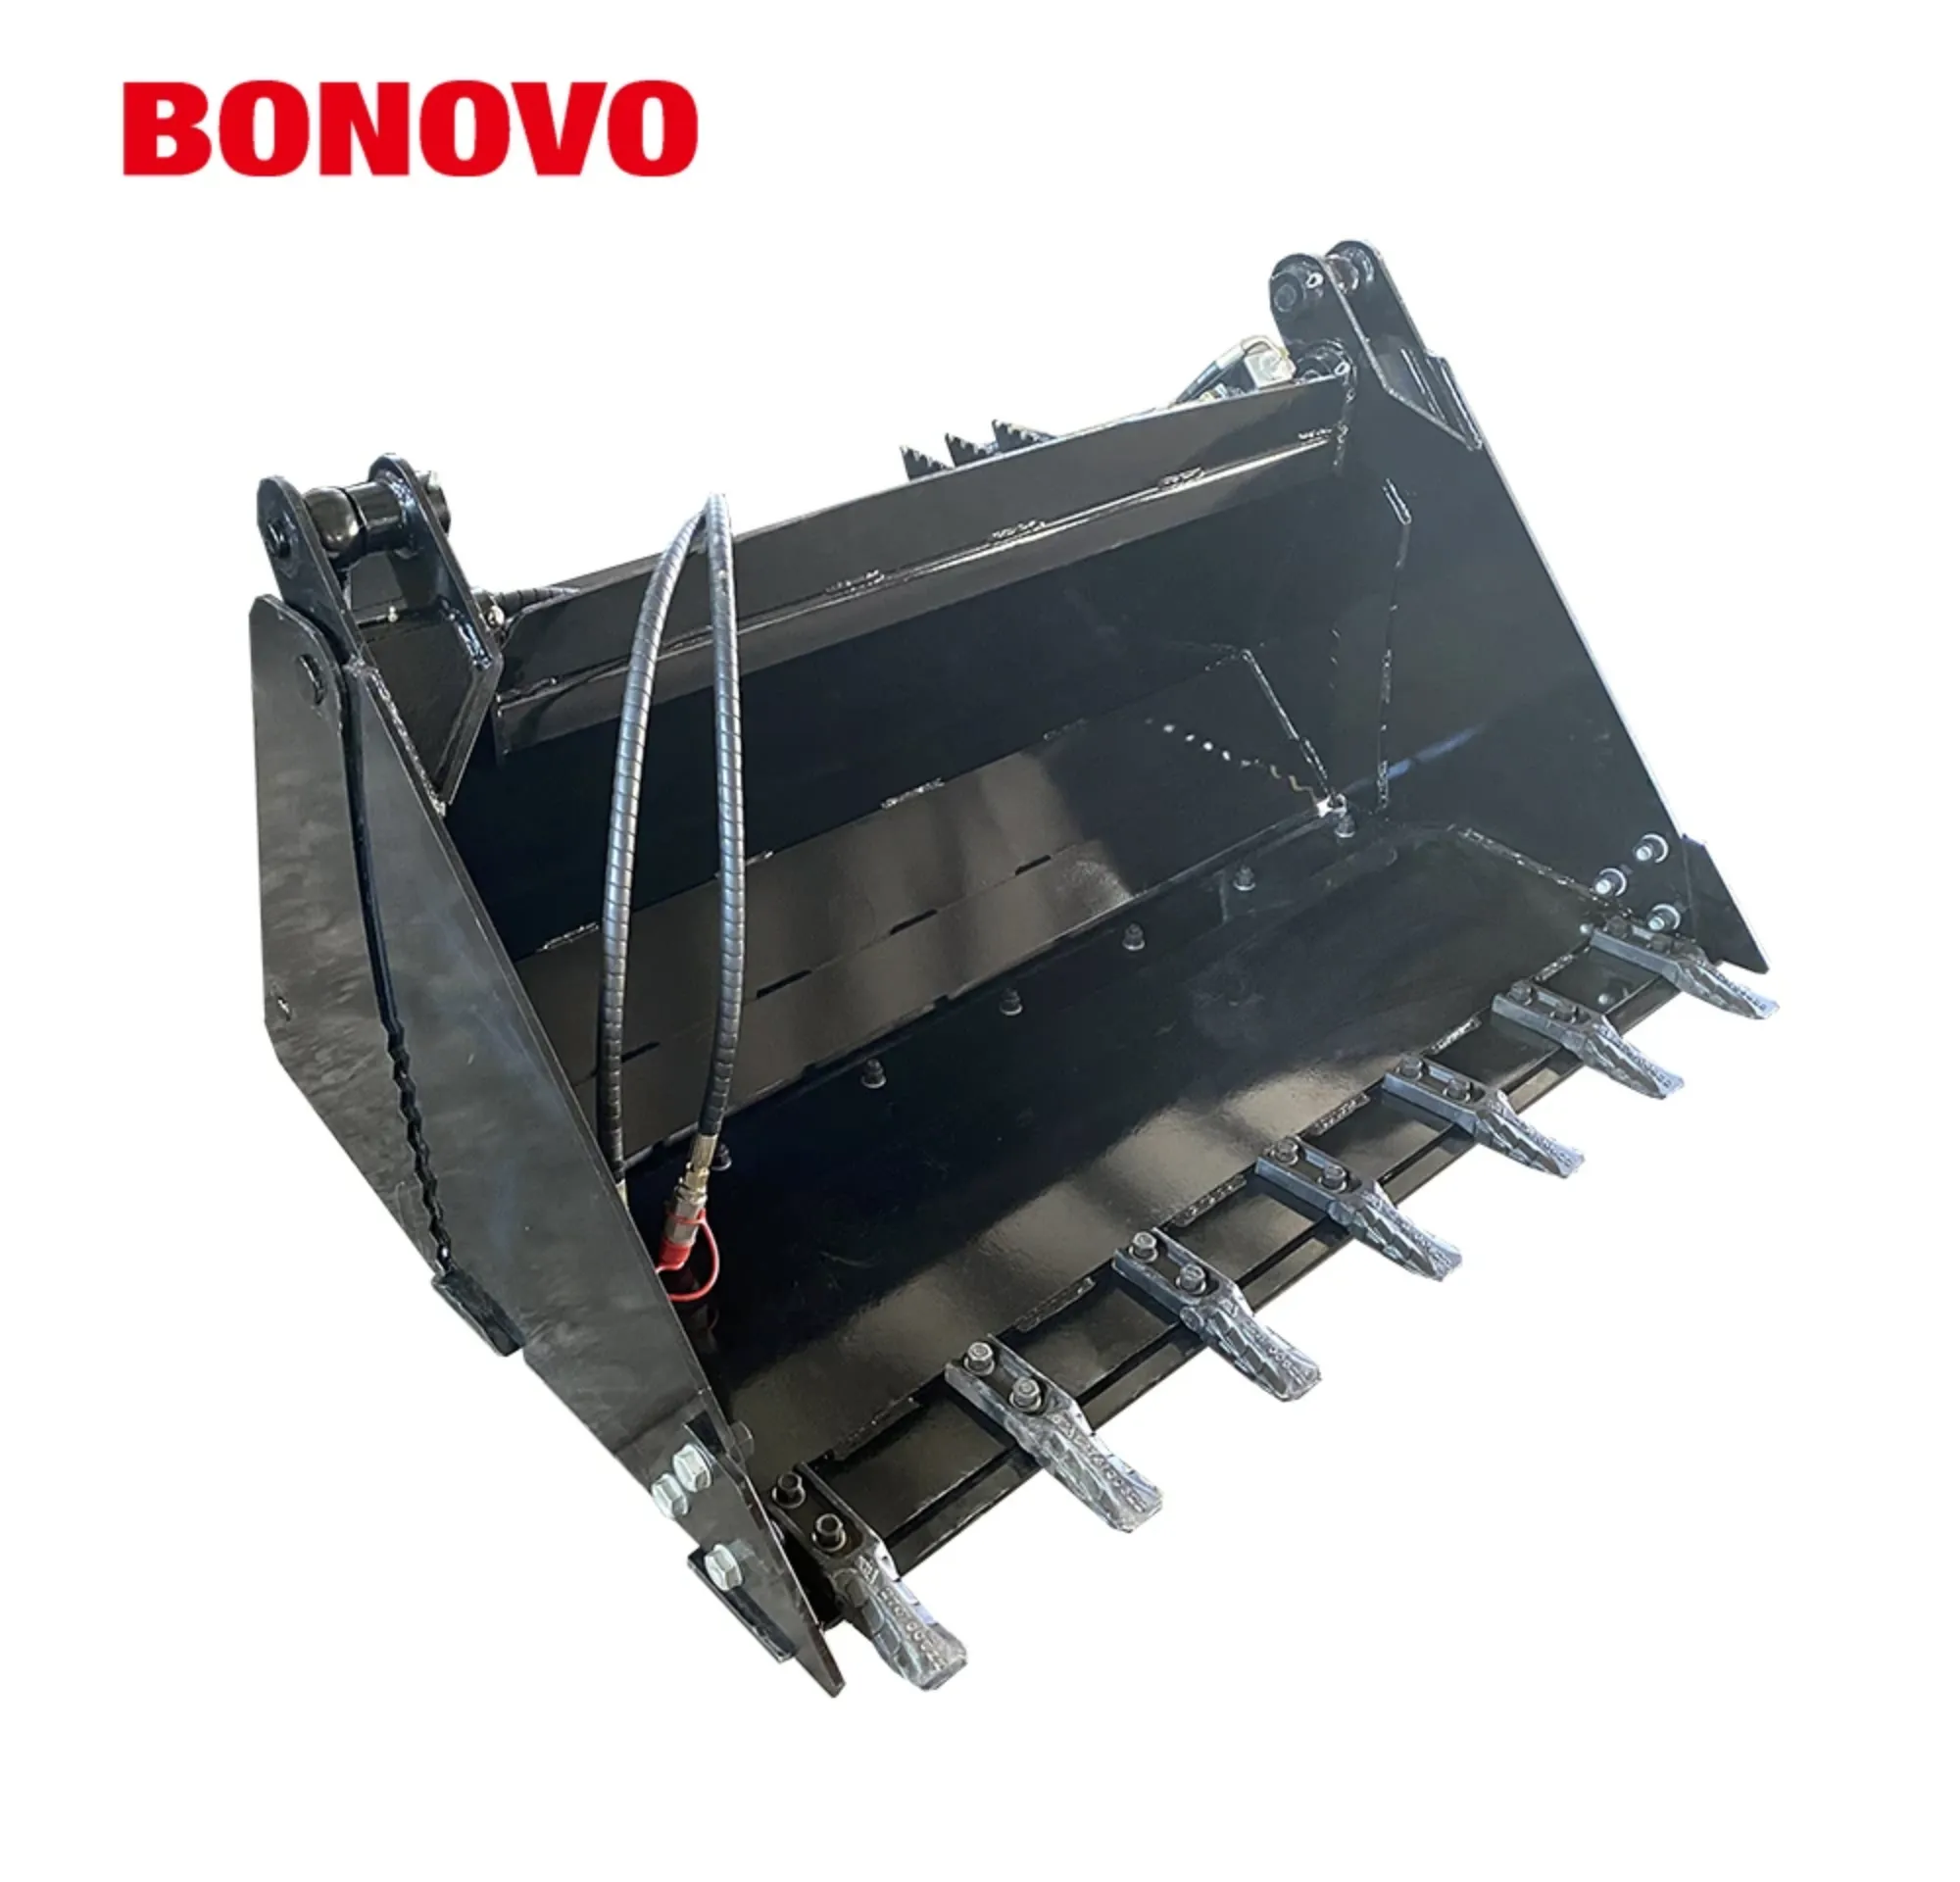 BONOVO 72 Inch Skid Steer 4 in 1 Bucket with Tooth